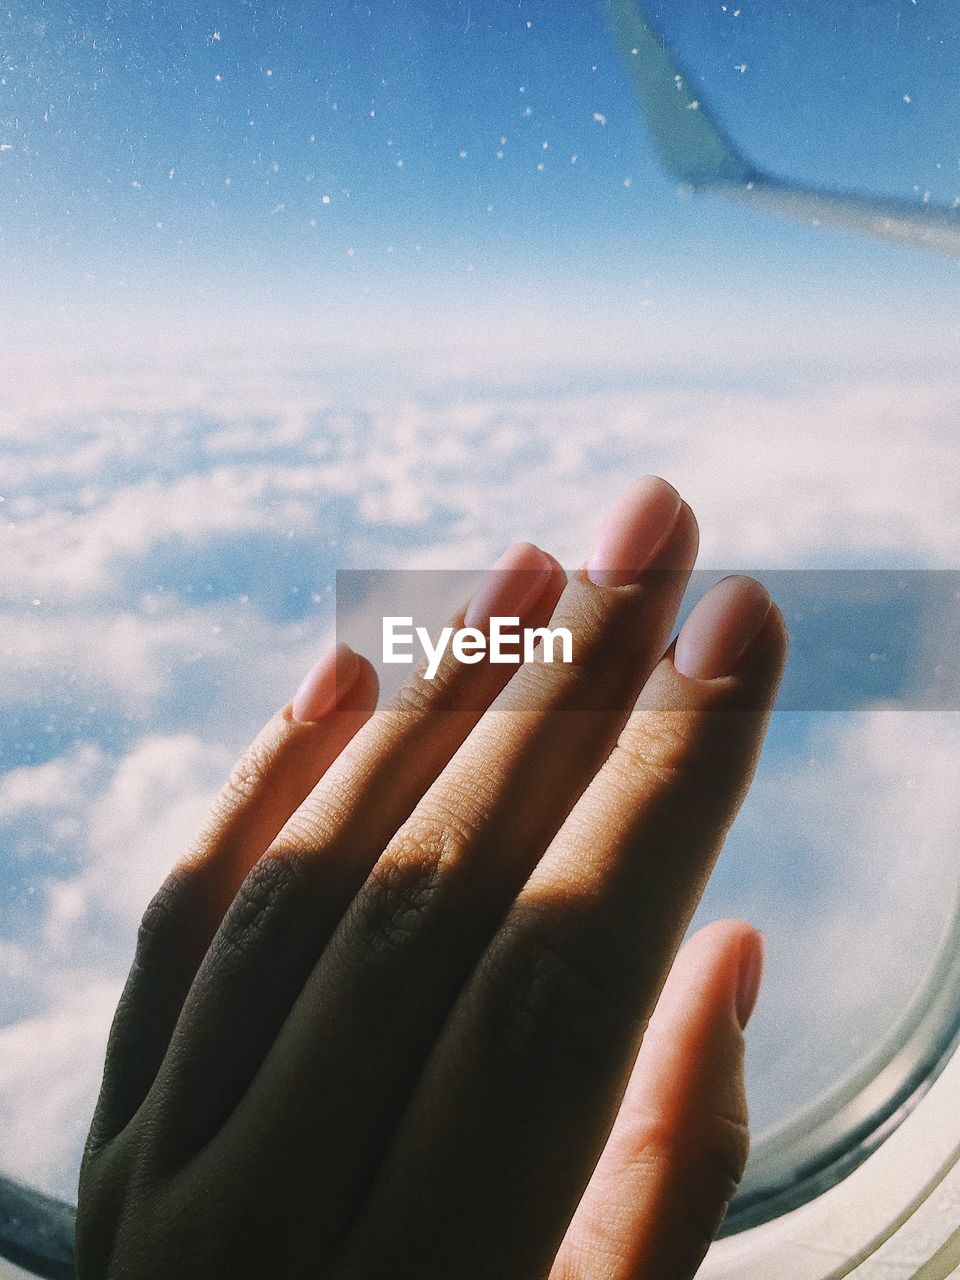 Close-up of woman hand on airplane window